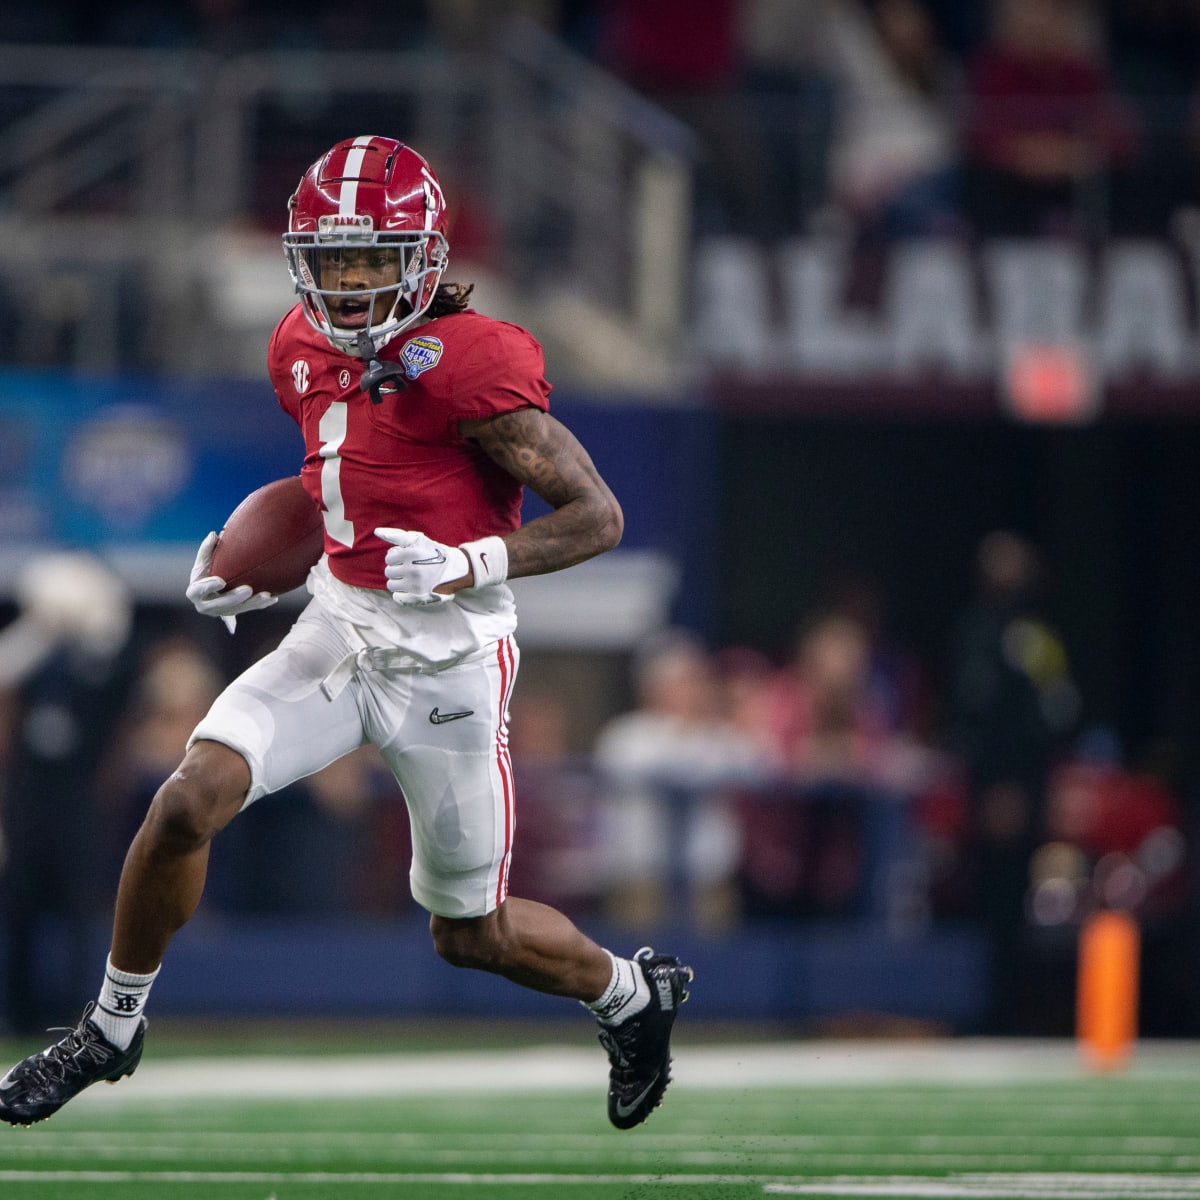 2022 NFL Mock Draft: Jameson Williams The First WR Off The Board?